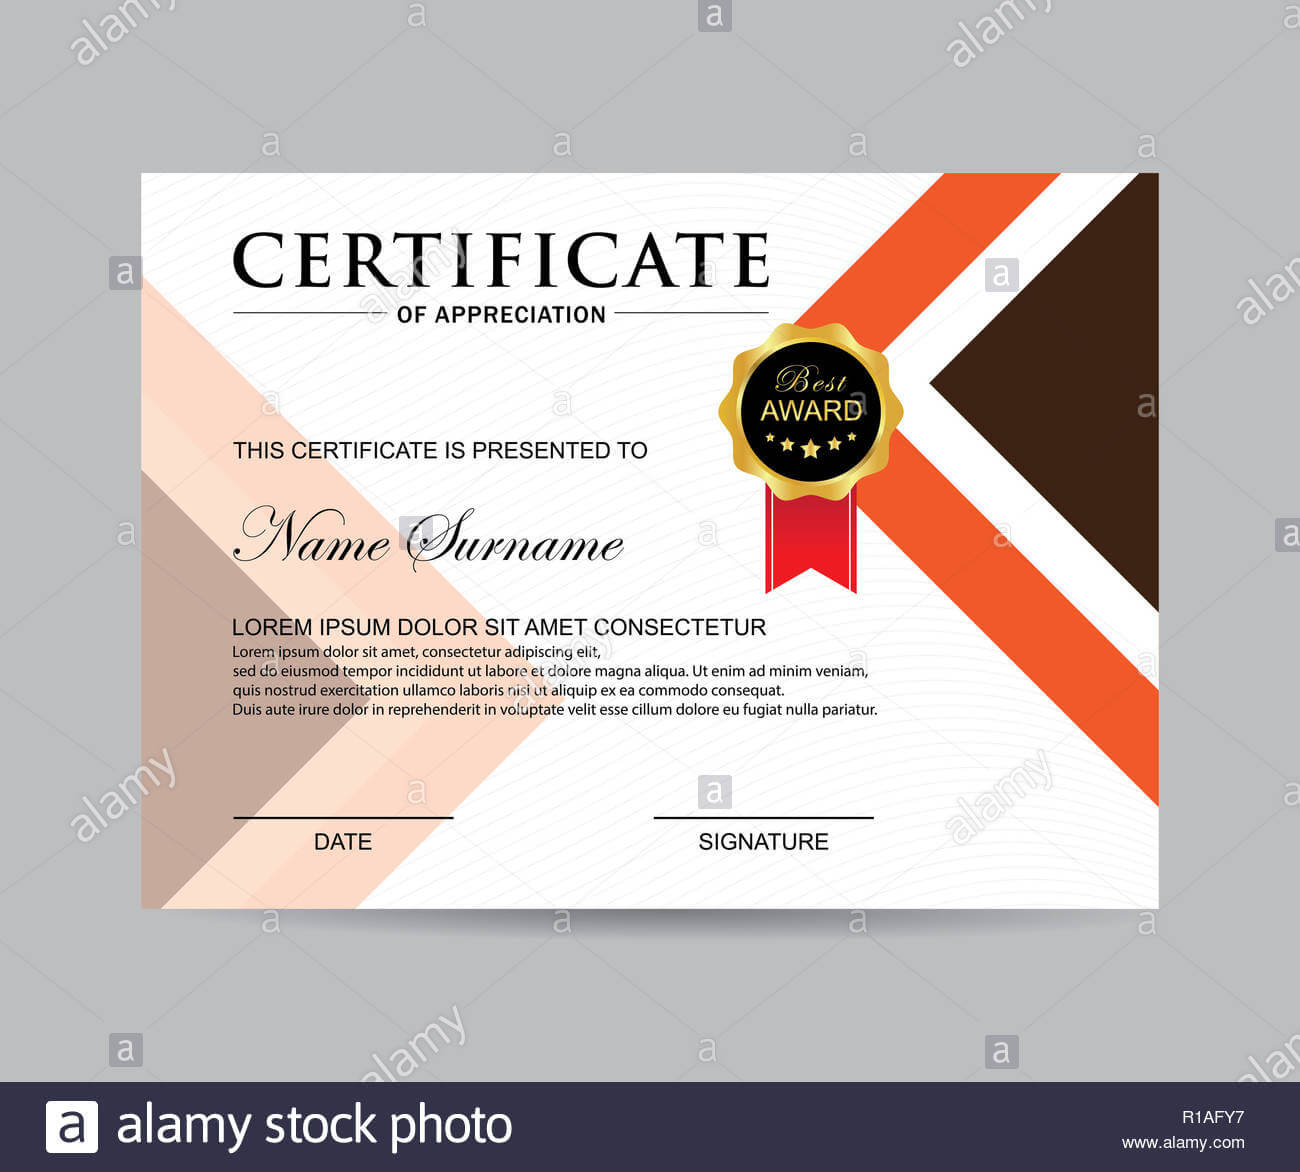 Modern Certificate Template And Background Stock Photo Within Borderless Certificate Templates